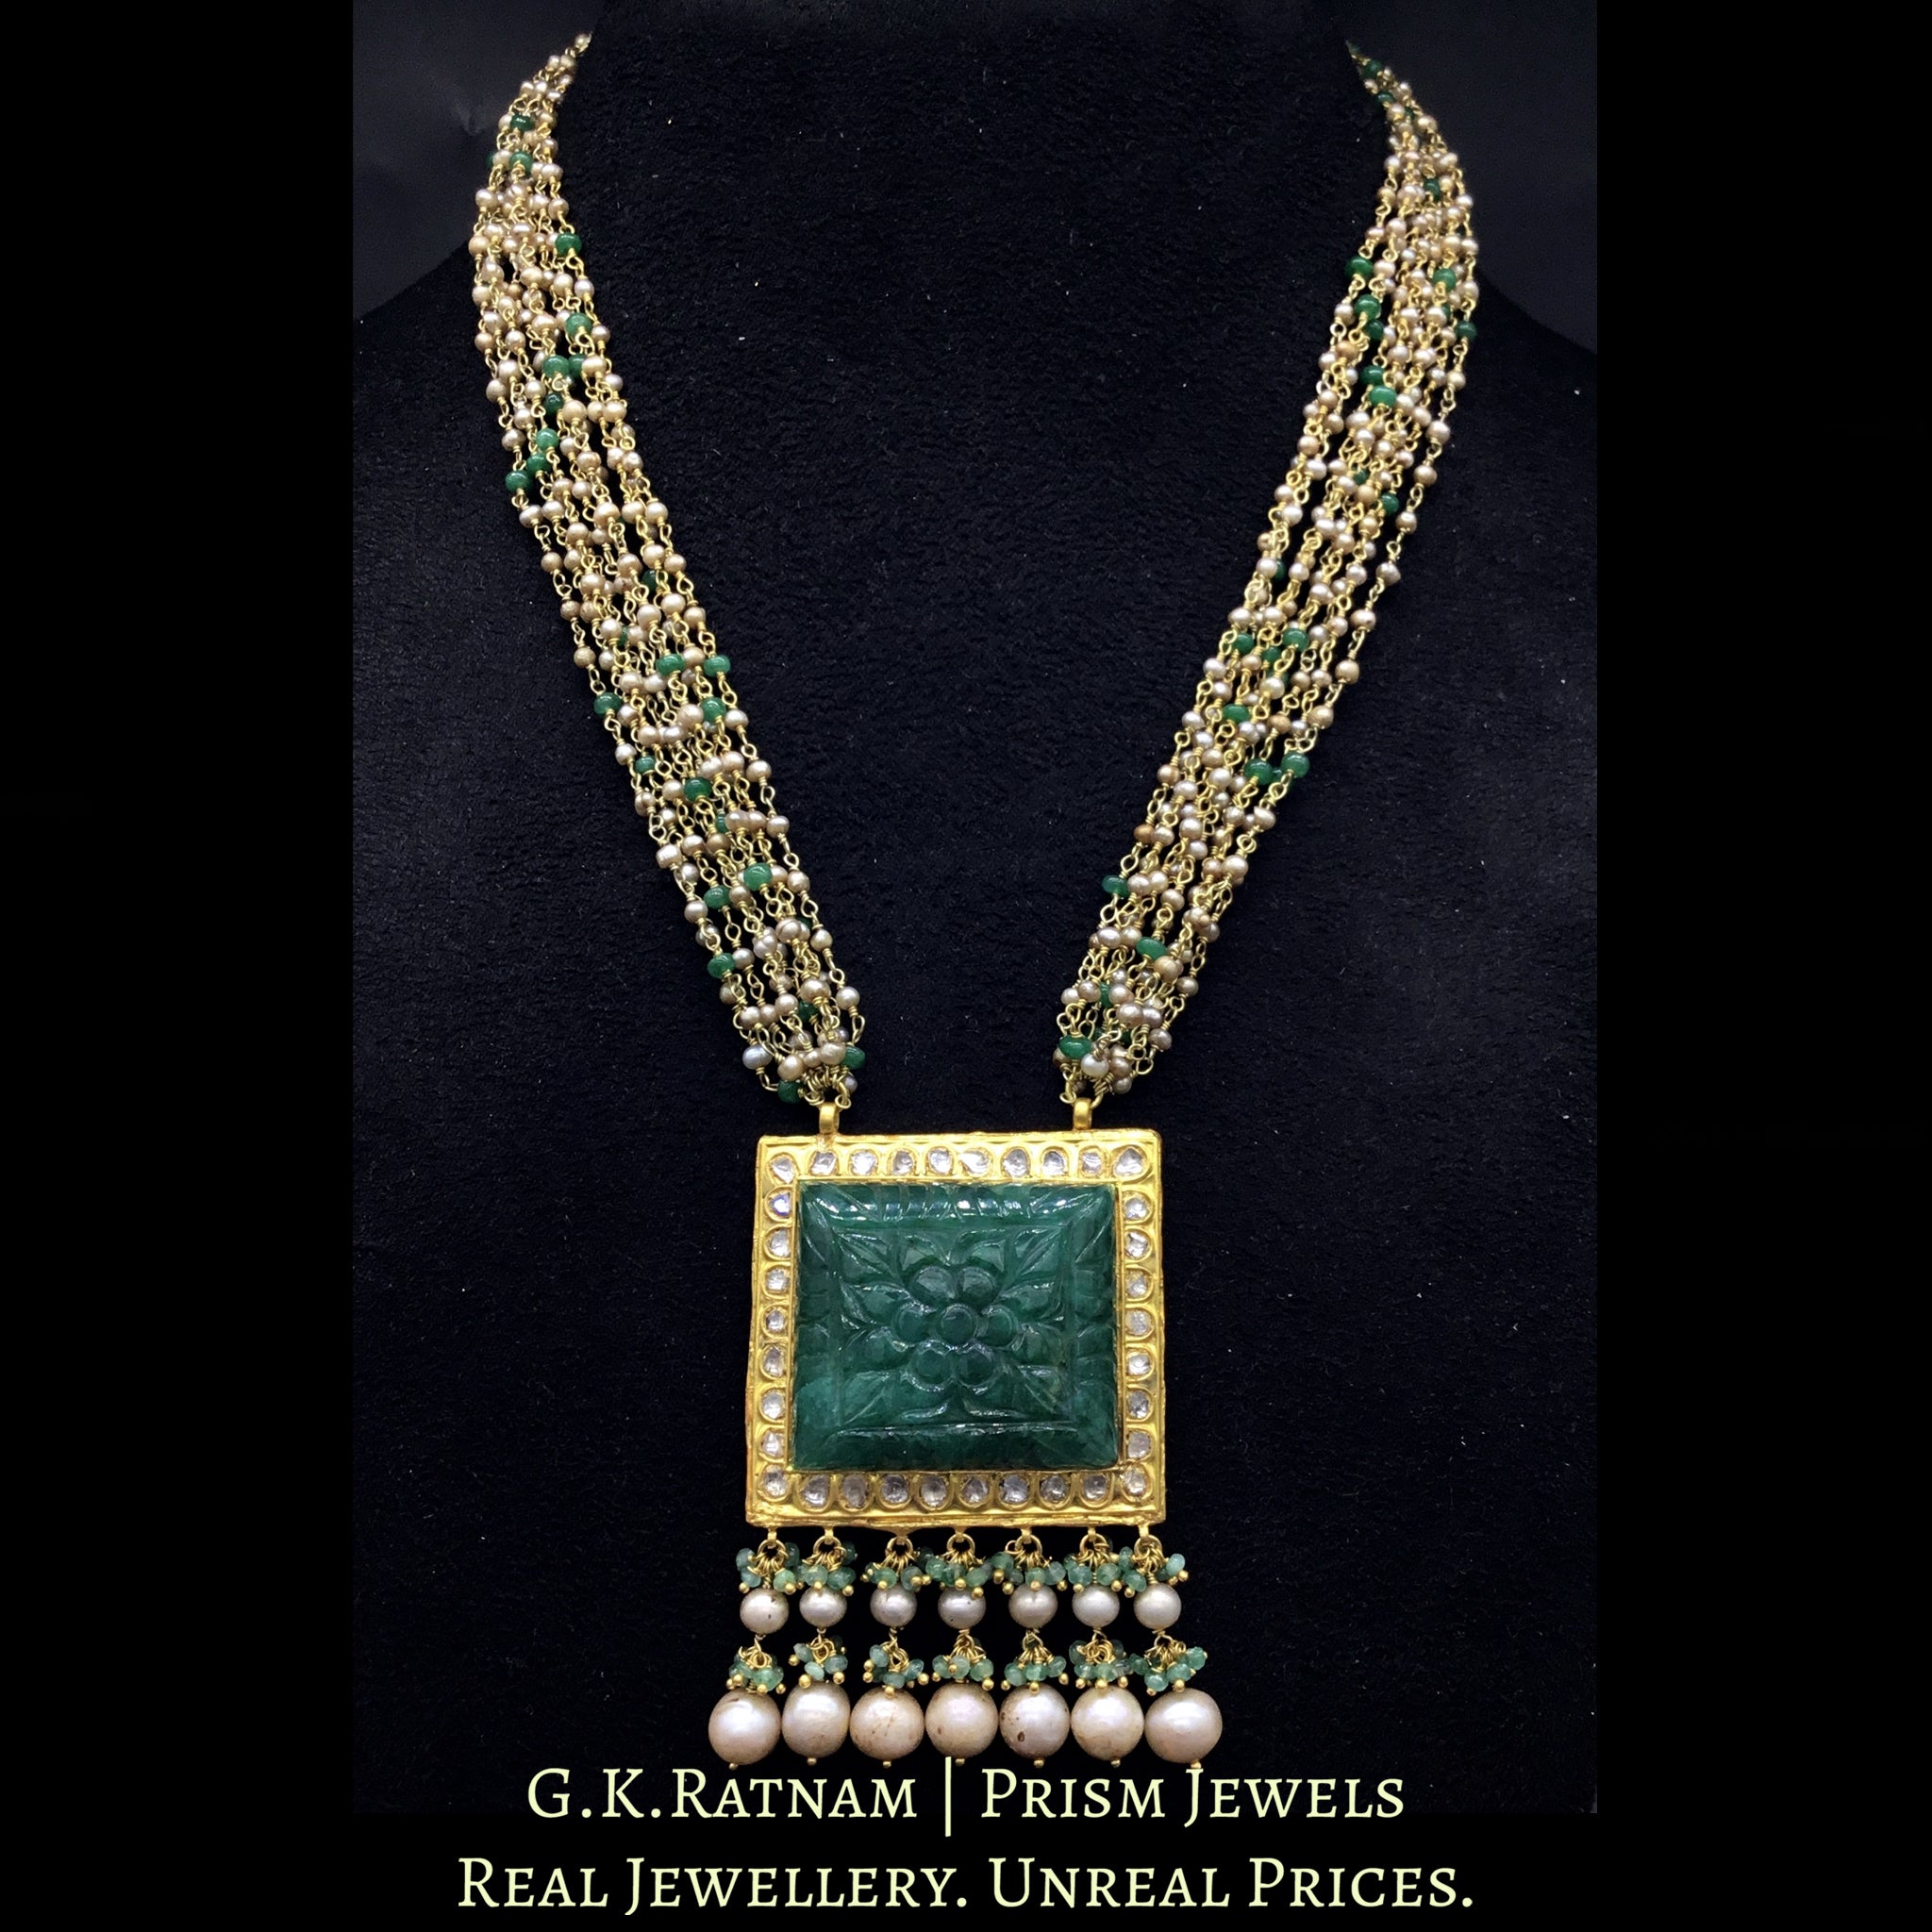 23k Gold and Diamond Polki Pendant with Square Carved Green Beryl strung in antiqued hyderabadi pearl chains